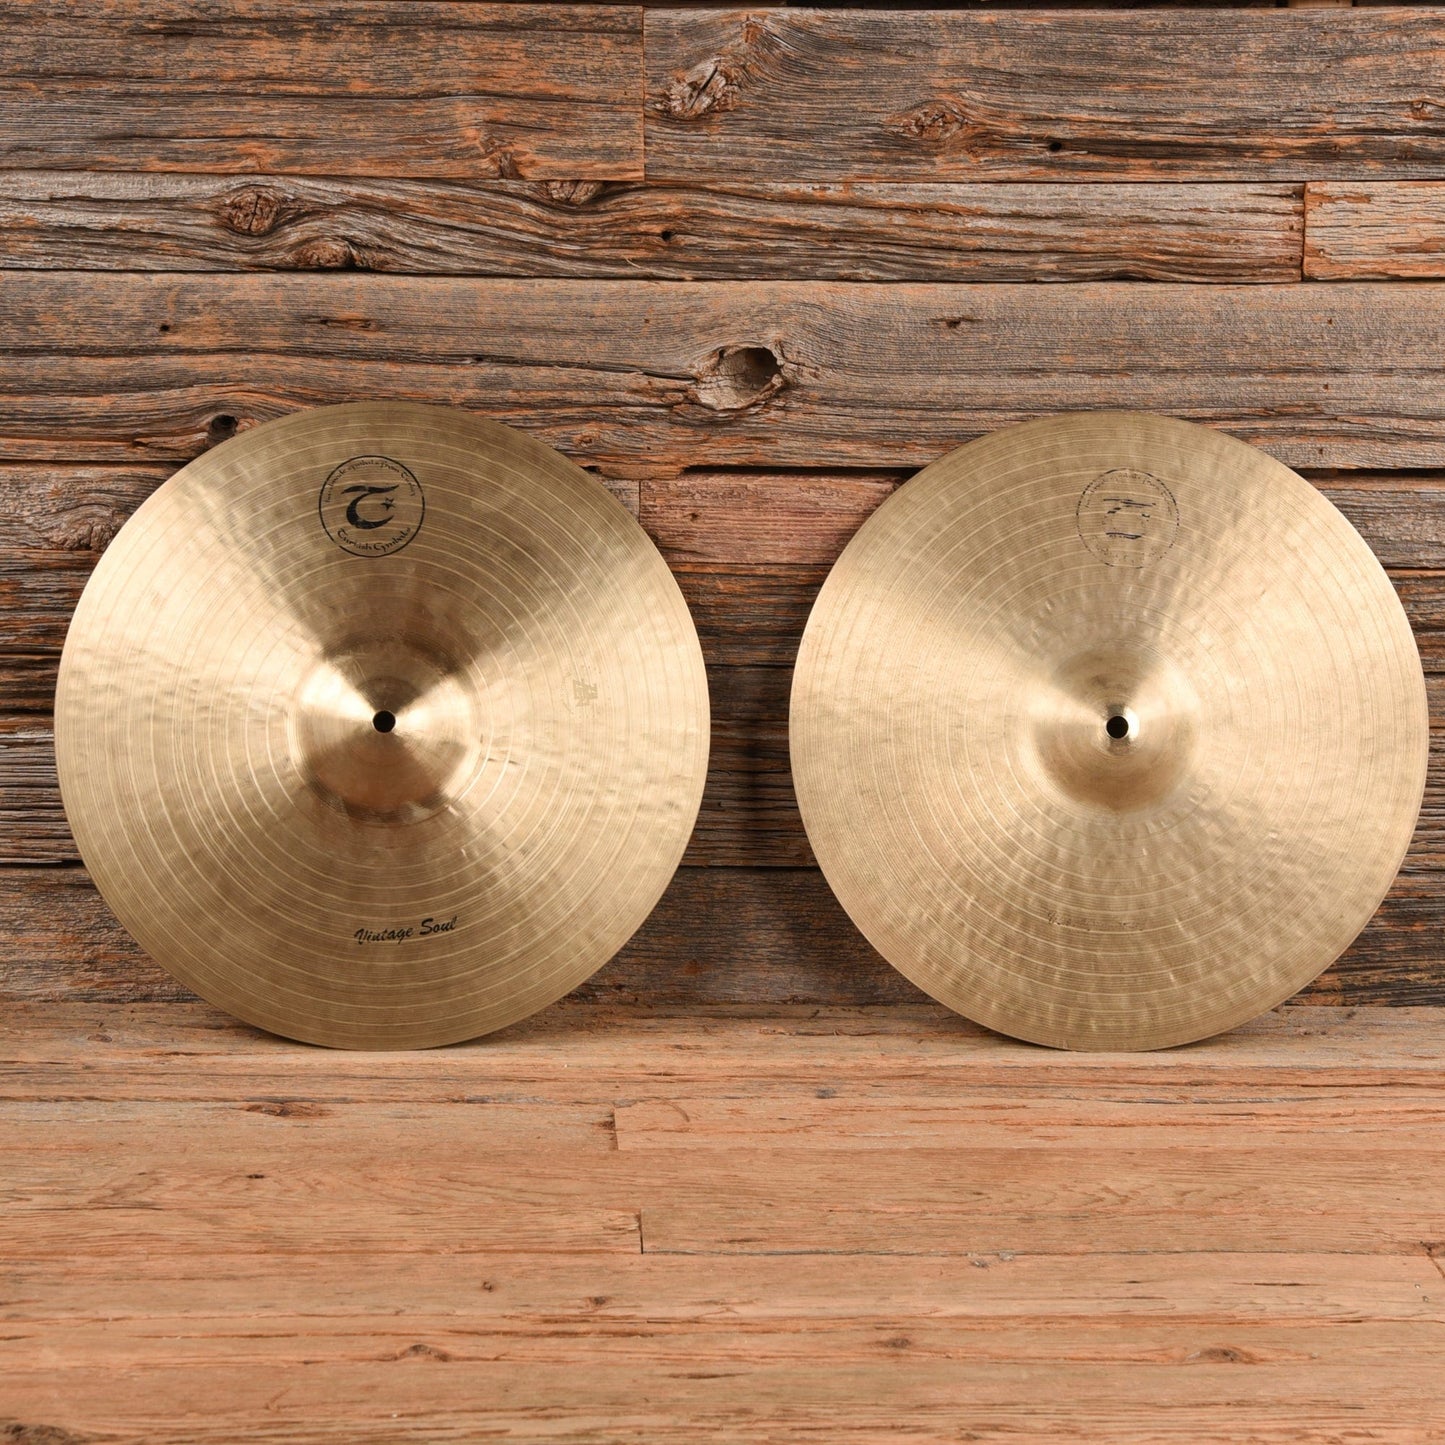 Turkish Cymbals 15" Vintage Soul Hi-Hat Pair USED Drums and Percussion